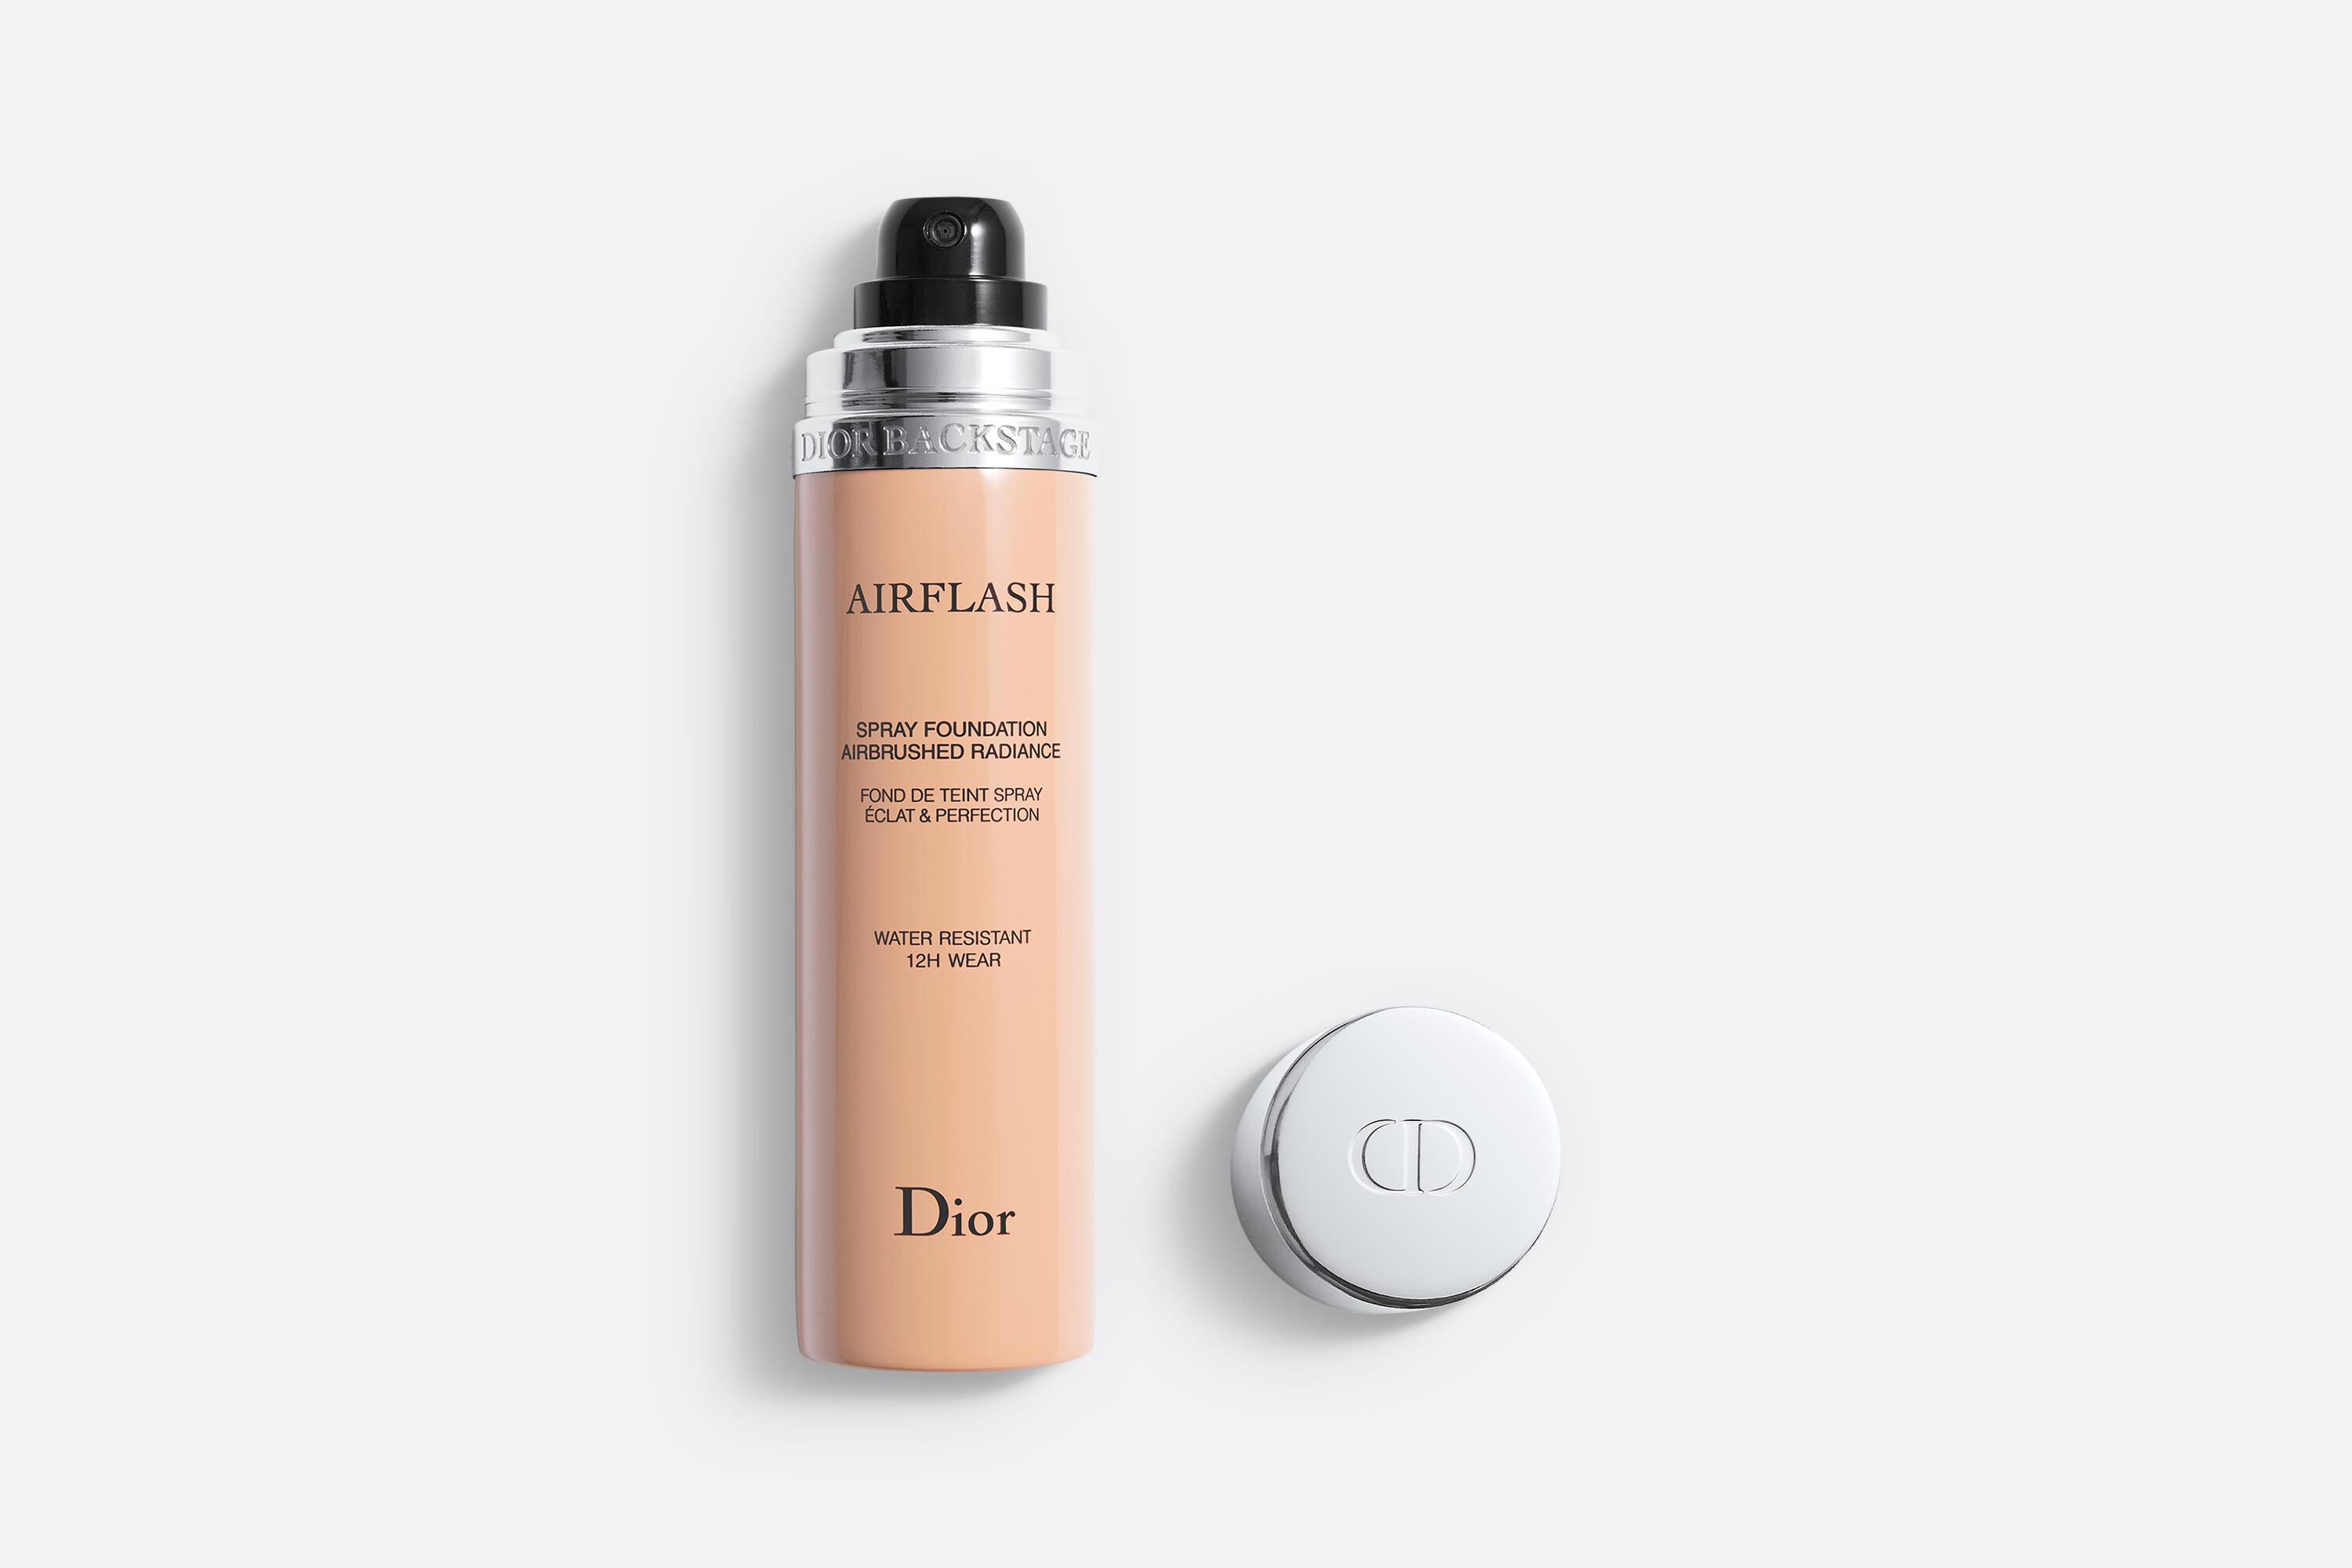 Dior Backstage Airflash: the iconic spray foundation inspired by